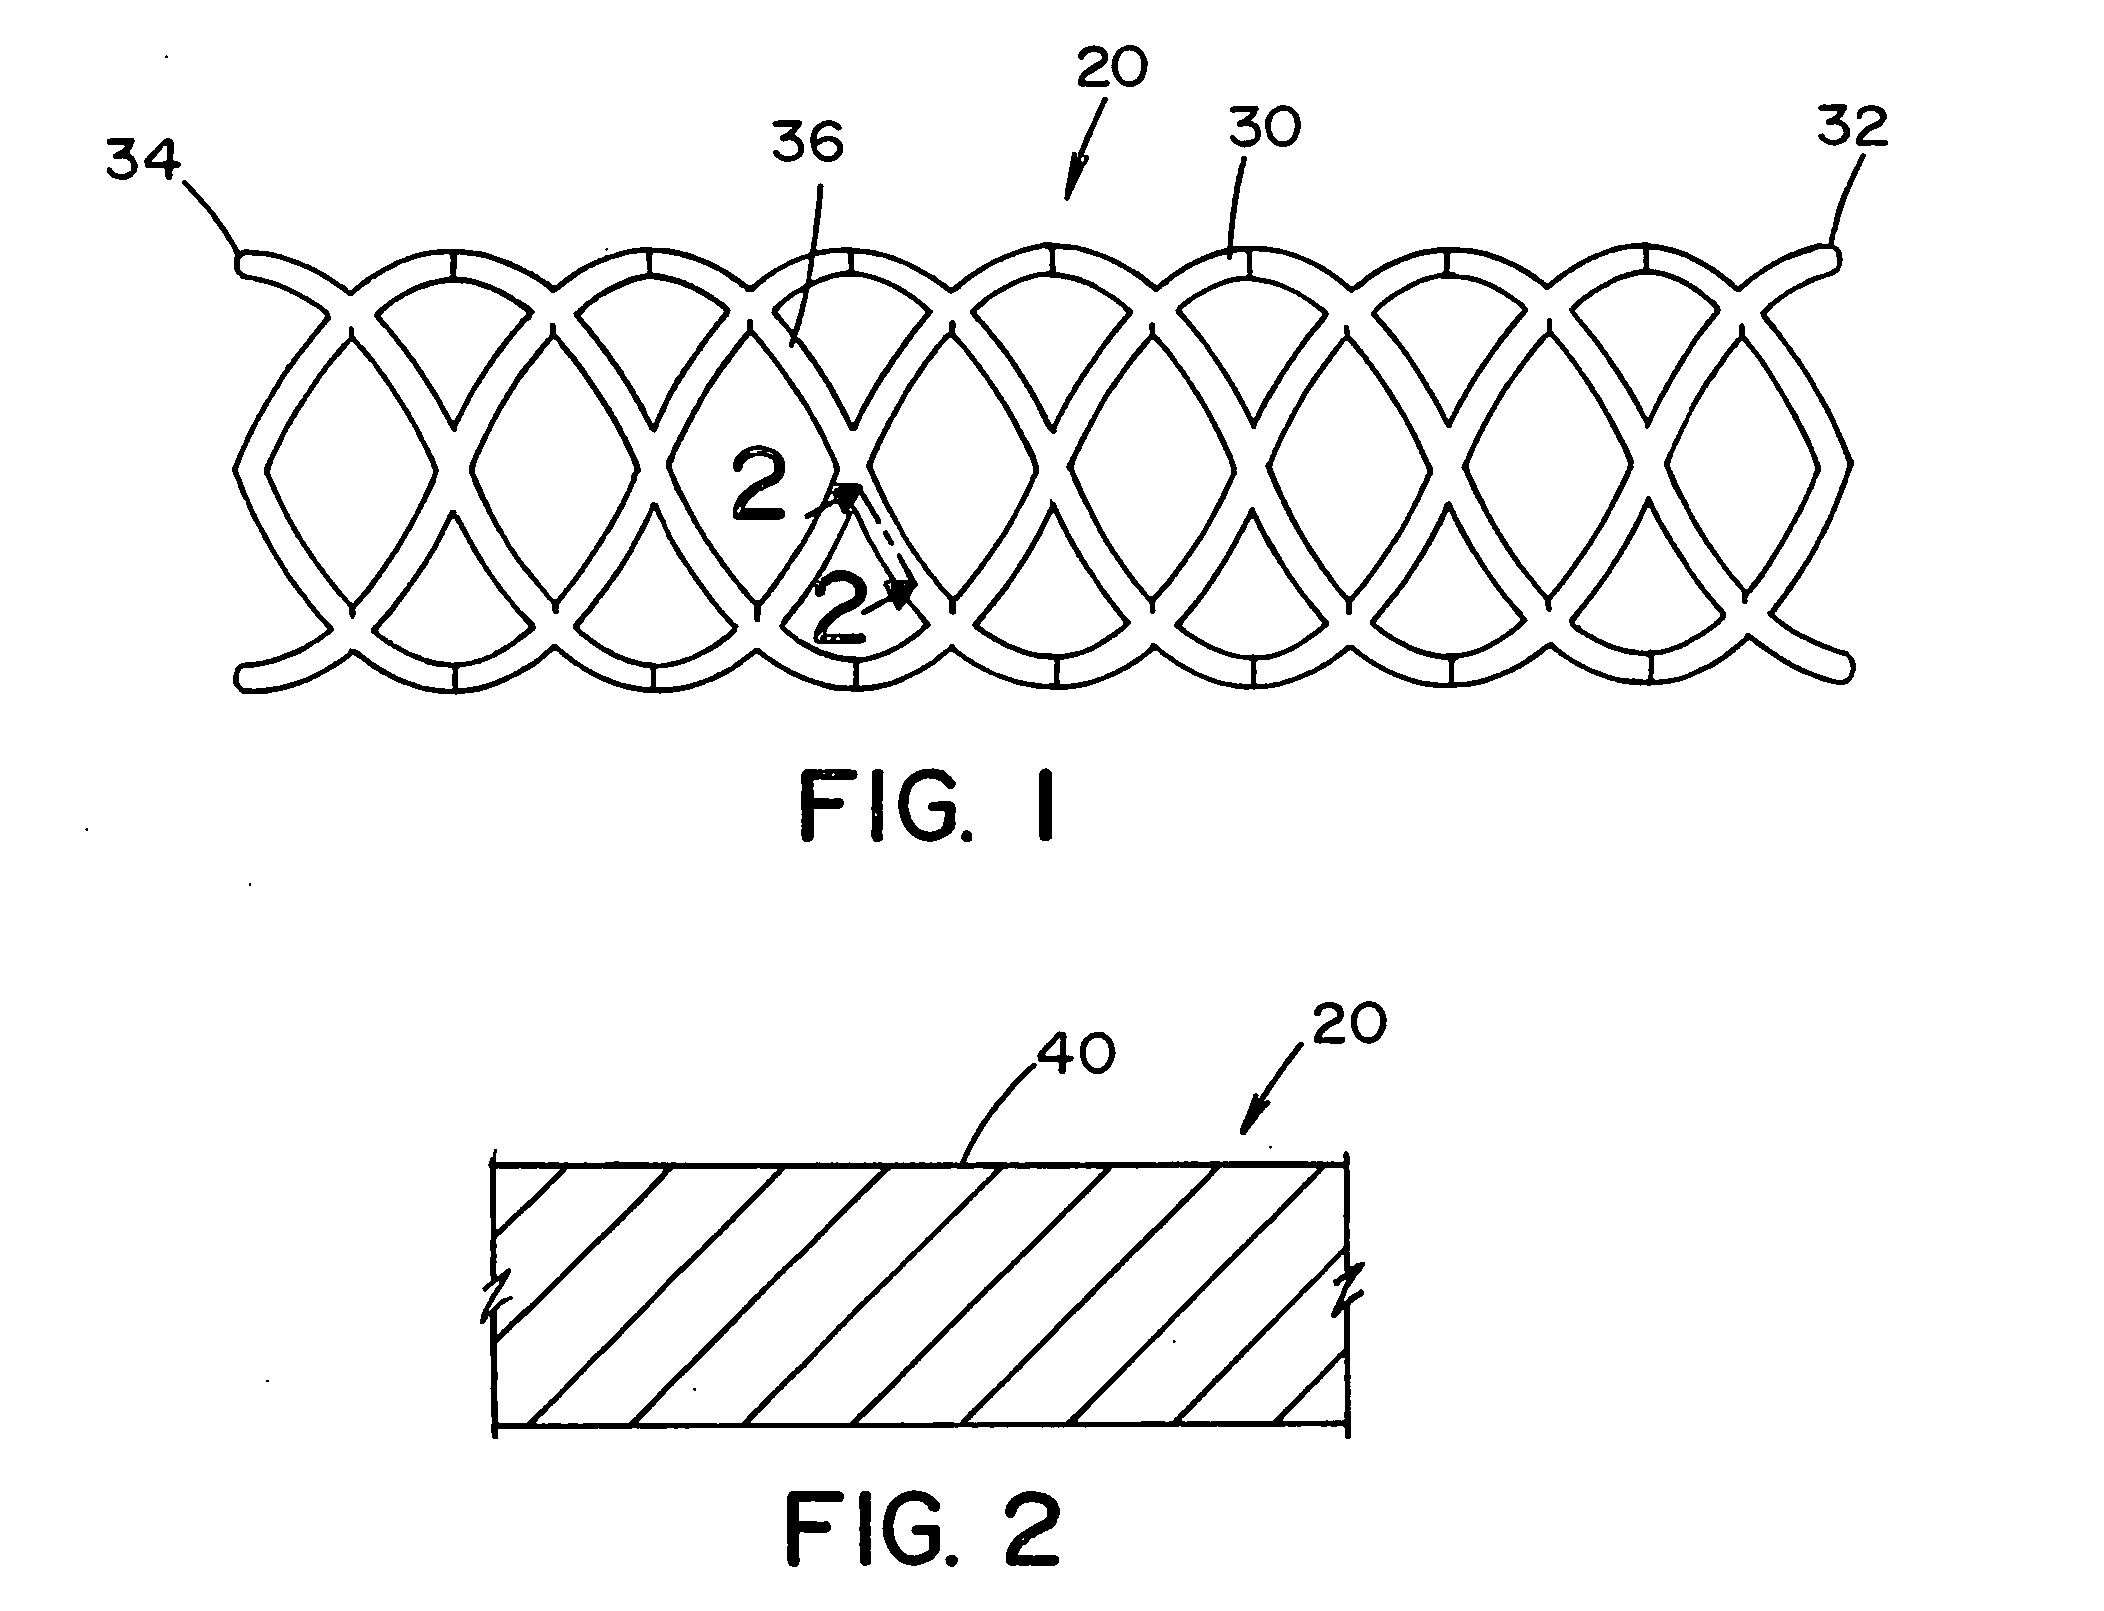 Metal alloy for a stent